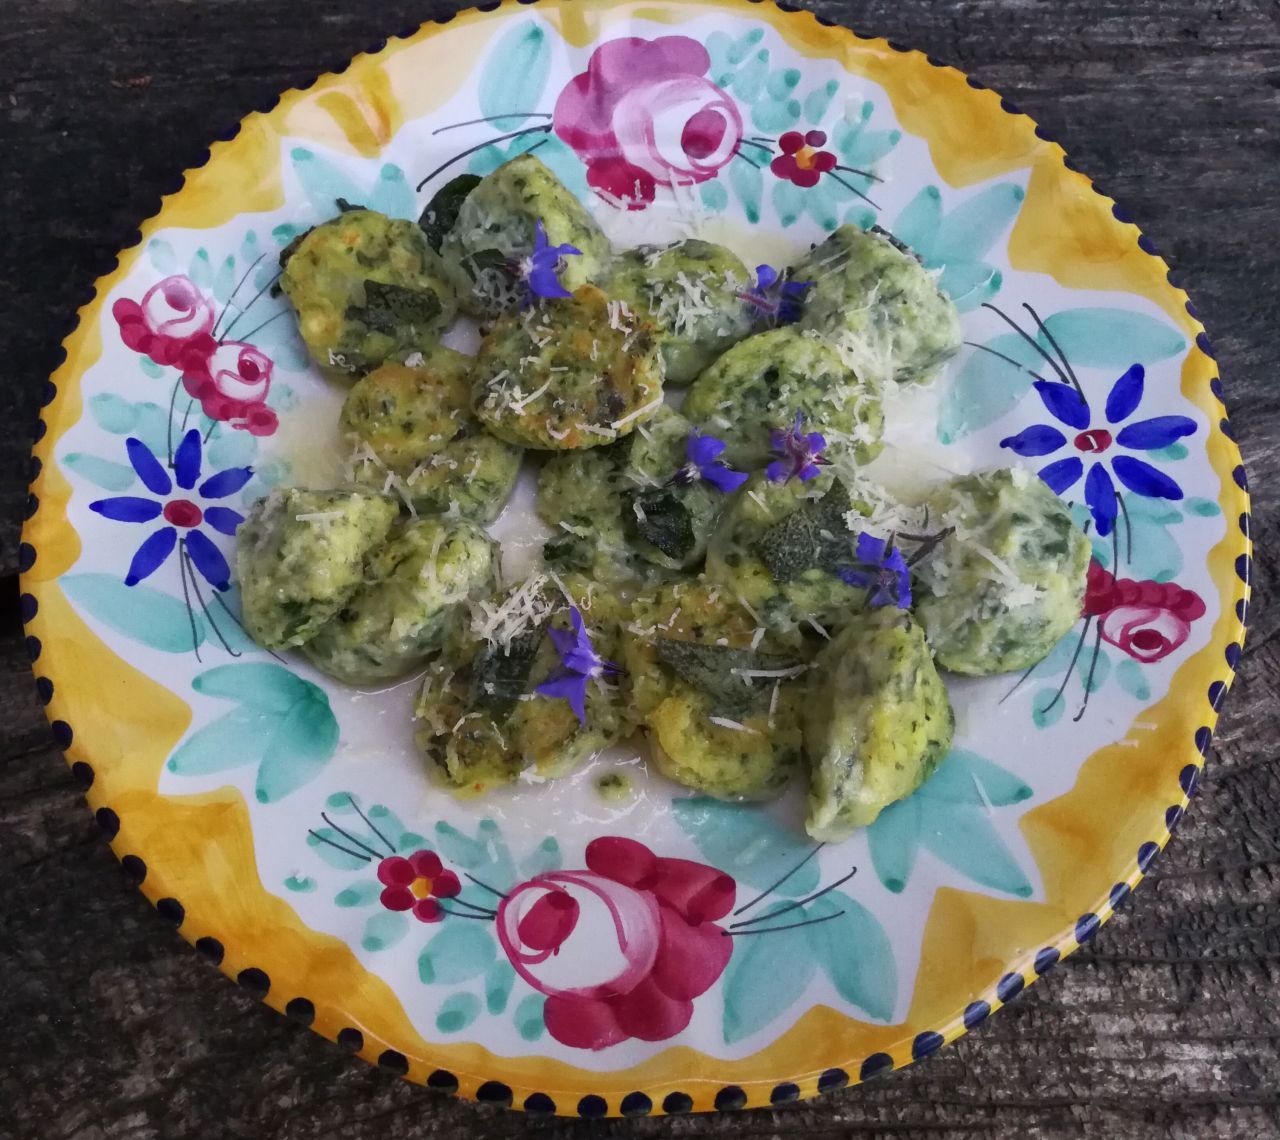 Gnudi, or naked ravioli, are made with foraged herbs and served with sage butter sauce and Parmesan. These tasty bites are "naked" because they have no pasta dough around them. The spinach and ricotta filling is made into a gnocchi-like dumpling.